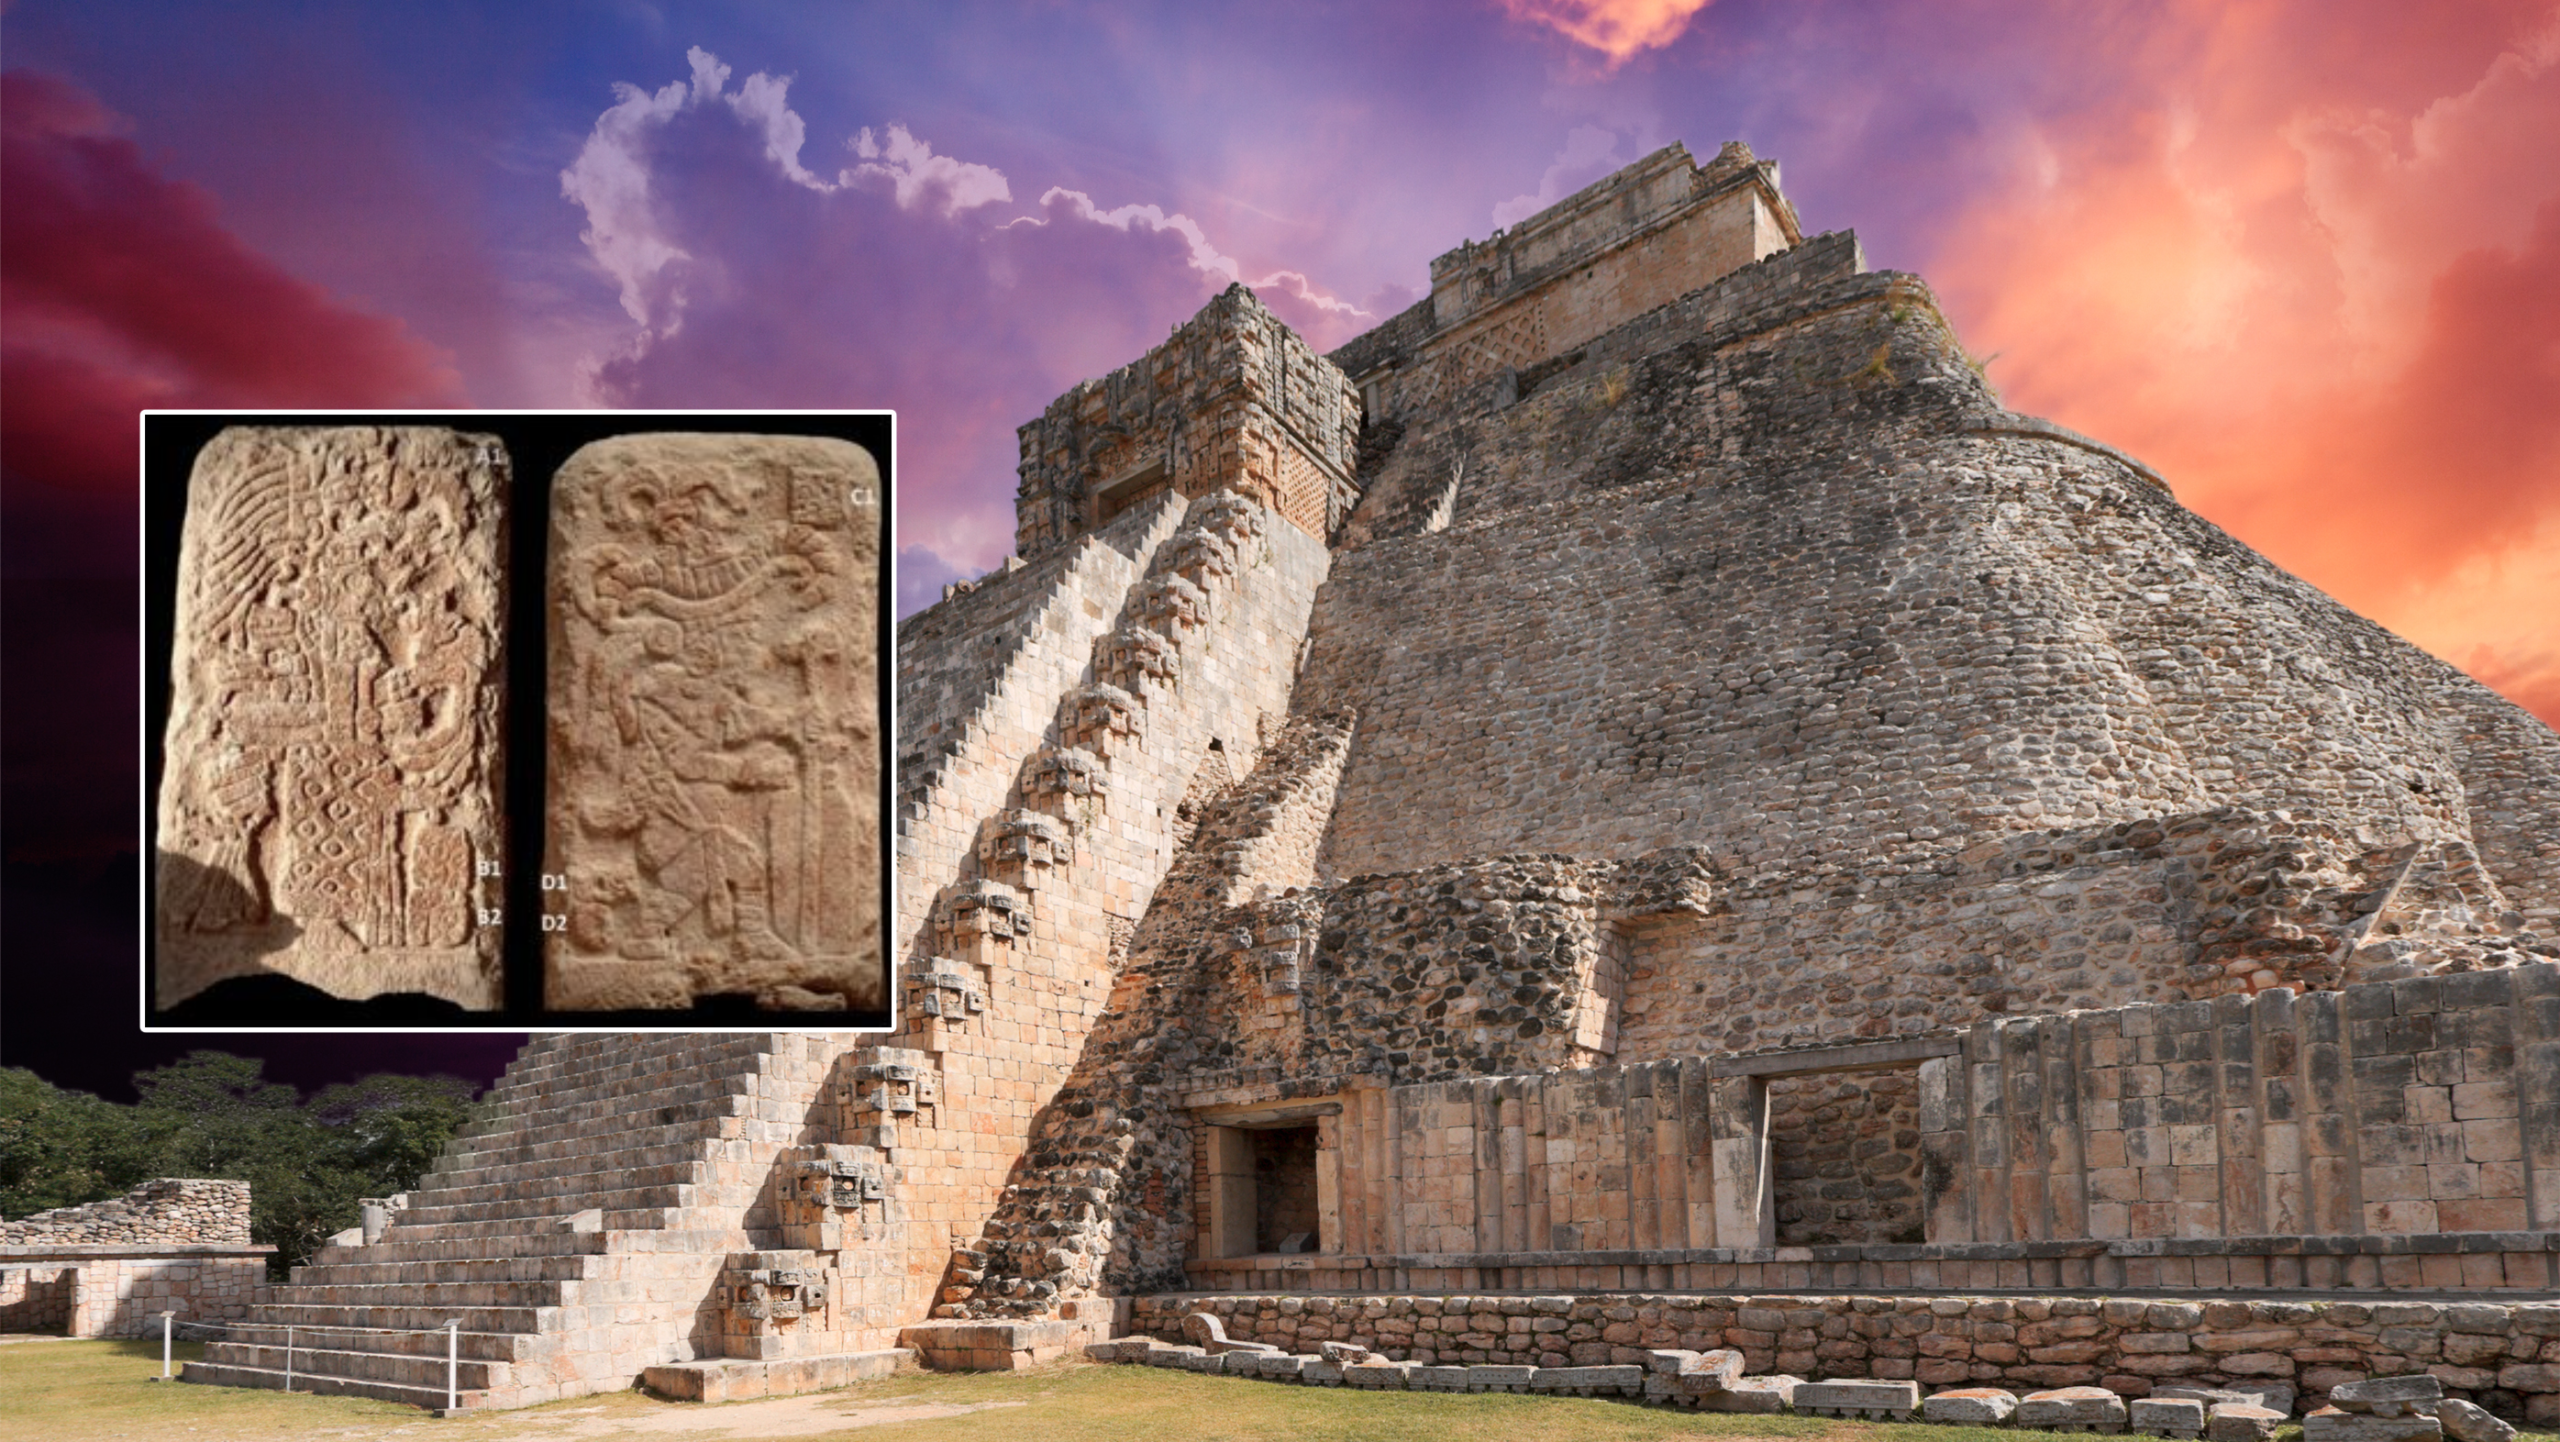 An image of the ancient Maya Pyramid in Uxmal, and the recently-found Stele. Image Credit: YAYIMAGES/INAH.